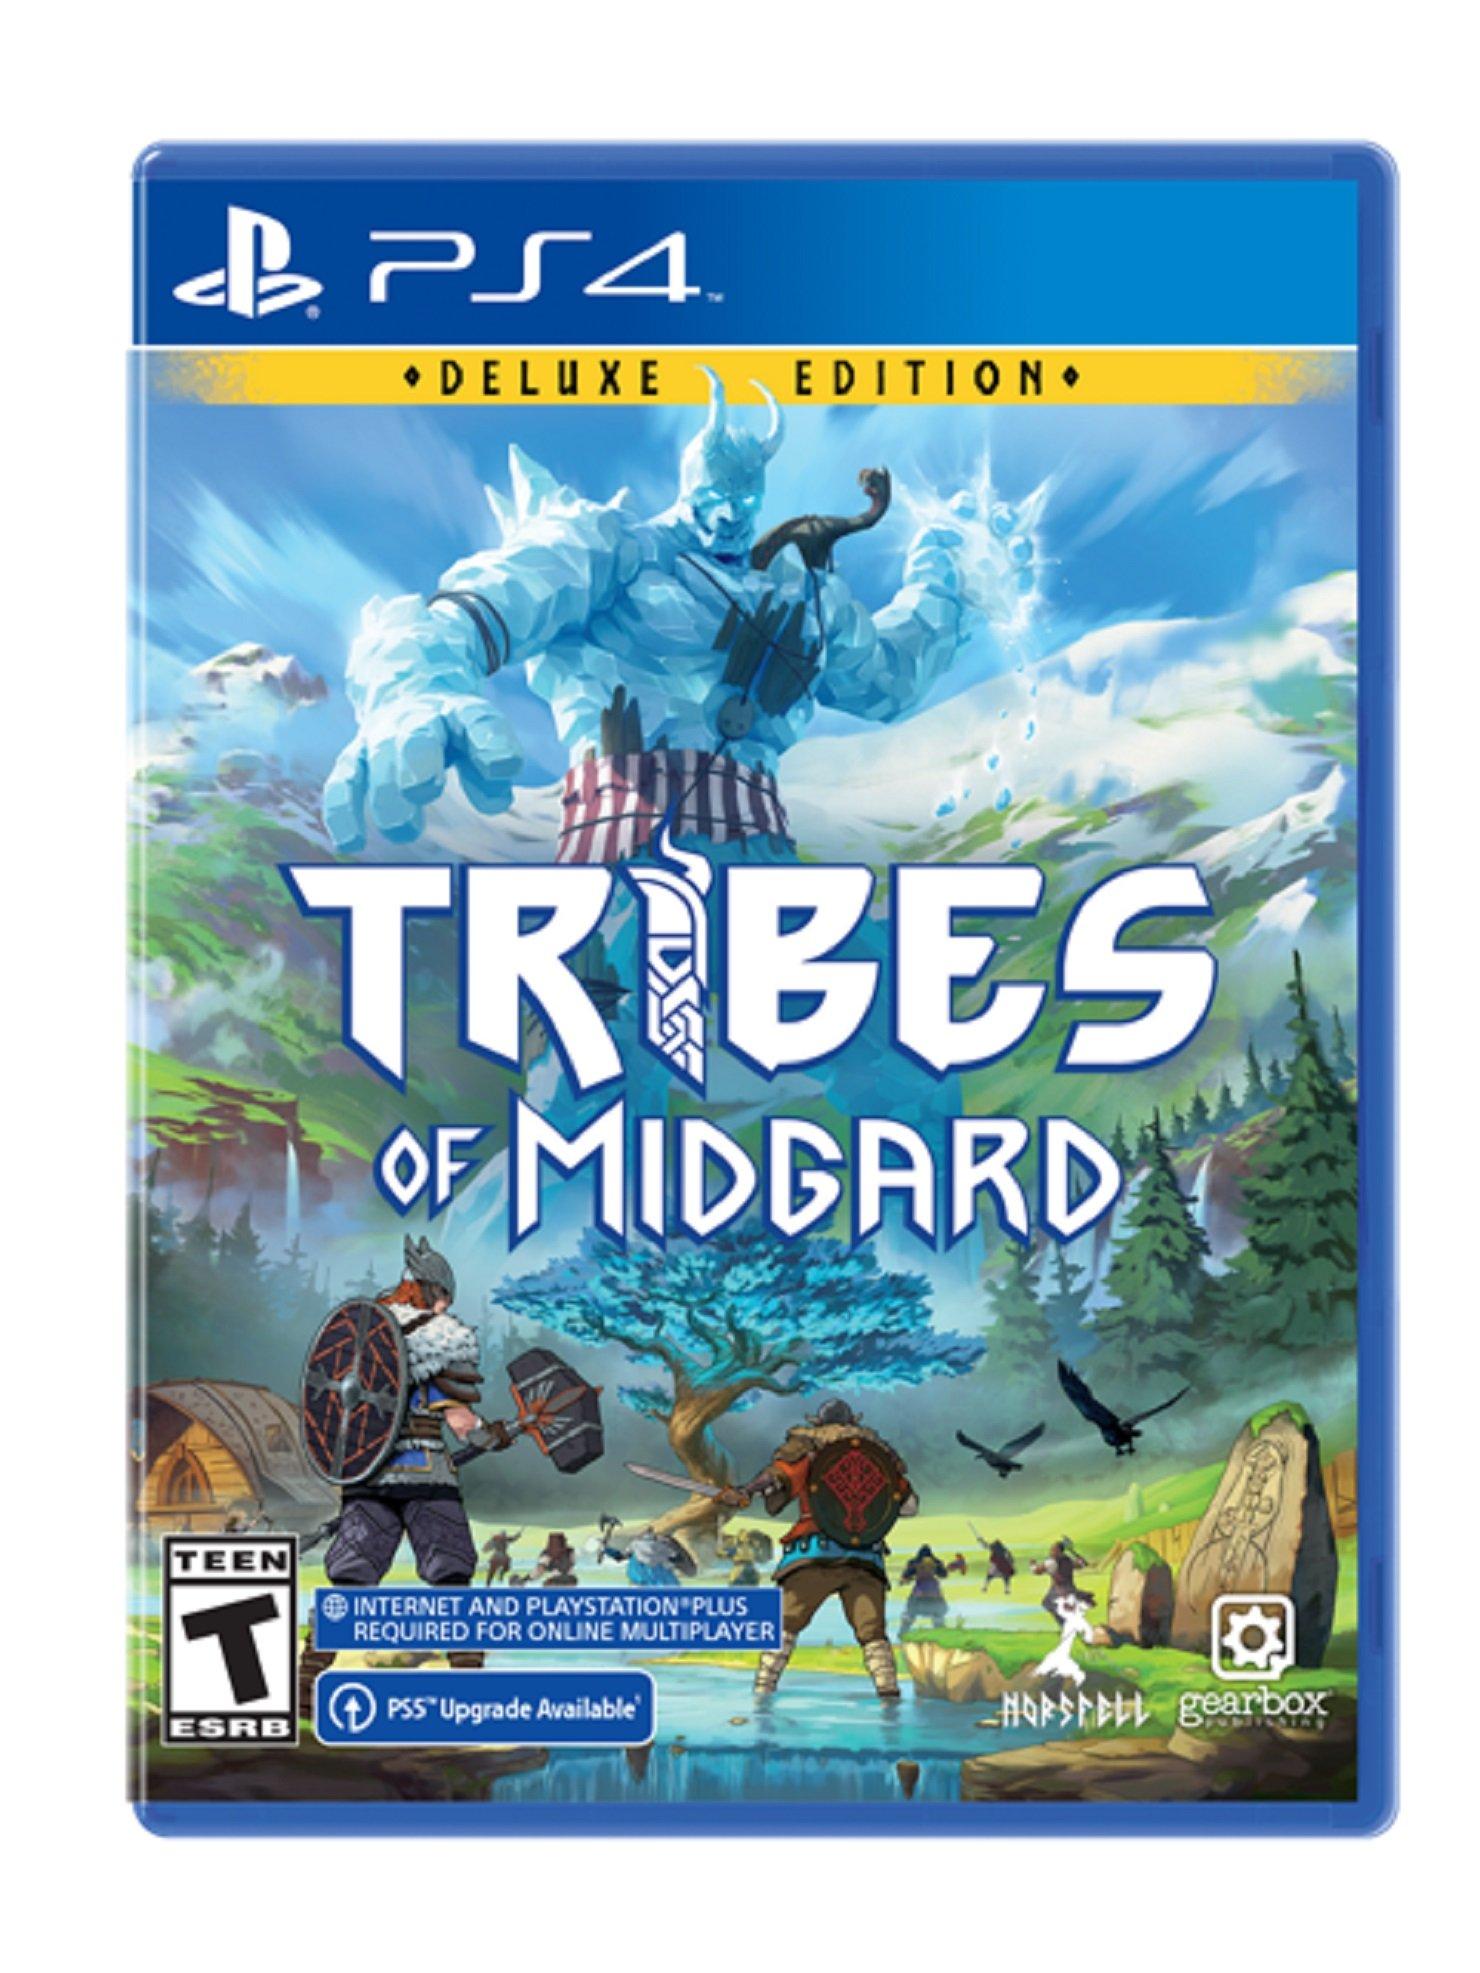 Tribes of Midgard - Deluxe Edition Contents - Epic Games Store